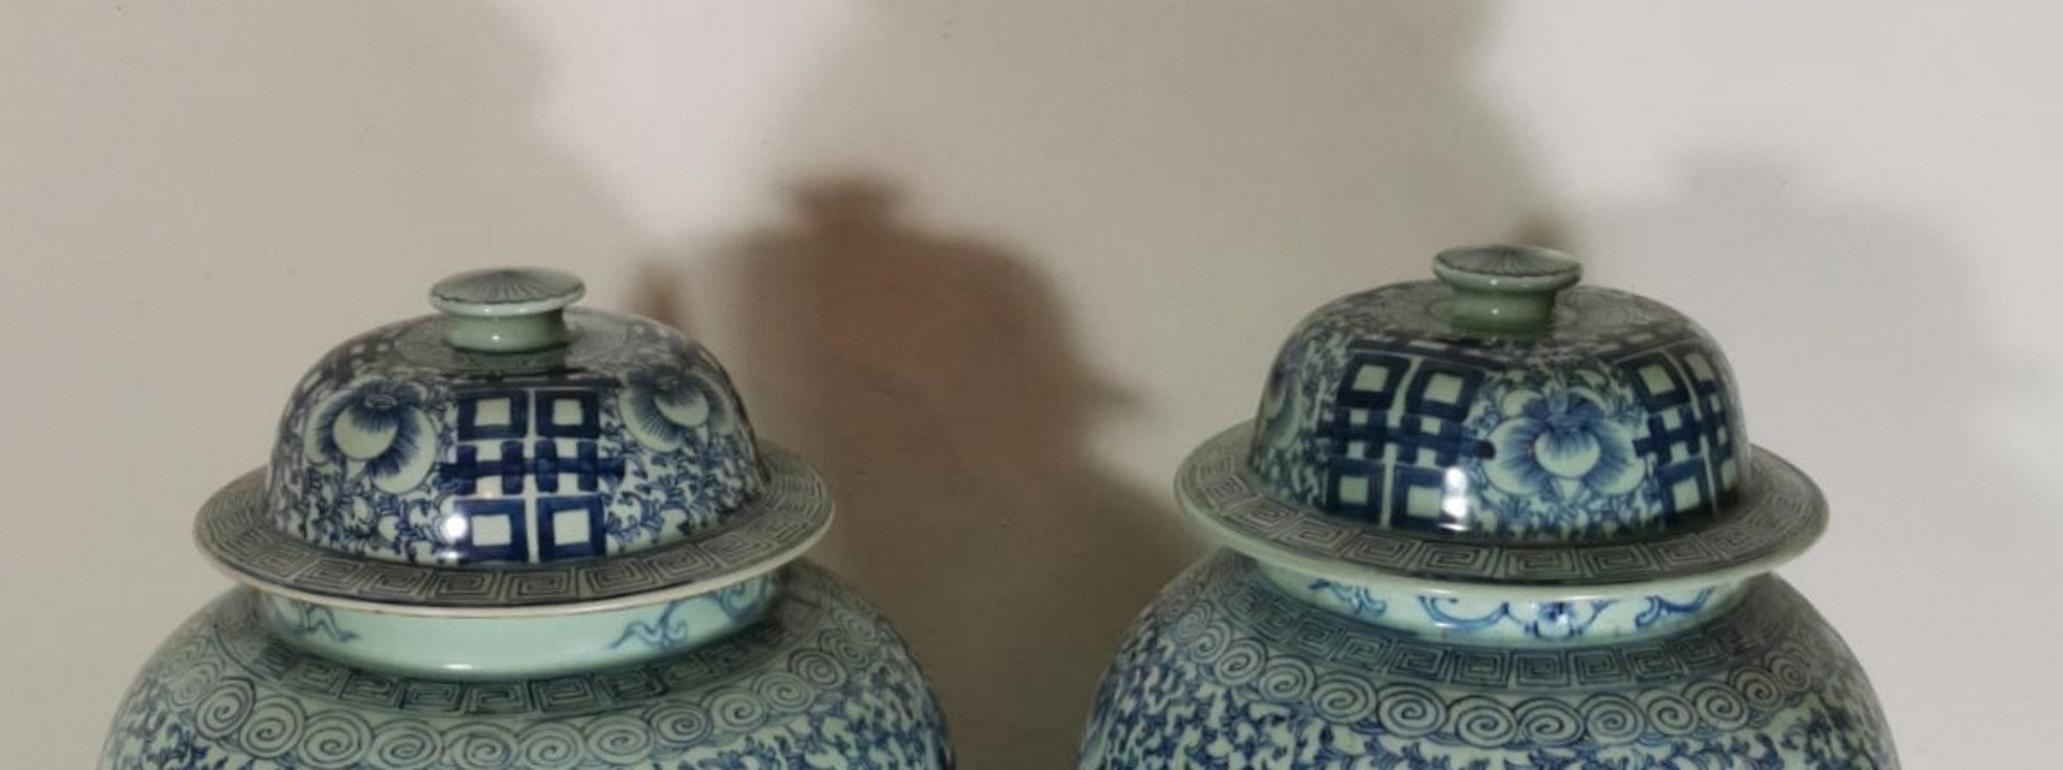 19th Century Pair of Large Chinese Wedding Vases with Lids 'Potiches' 1850